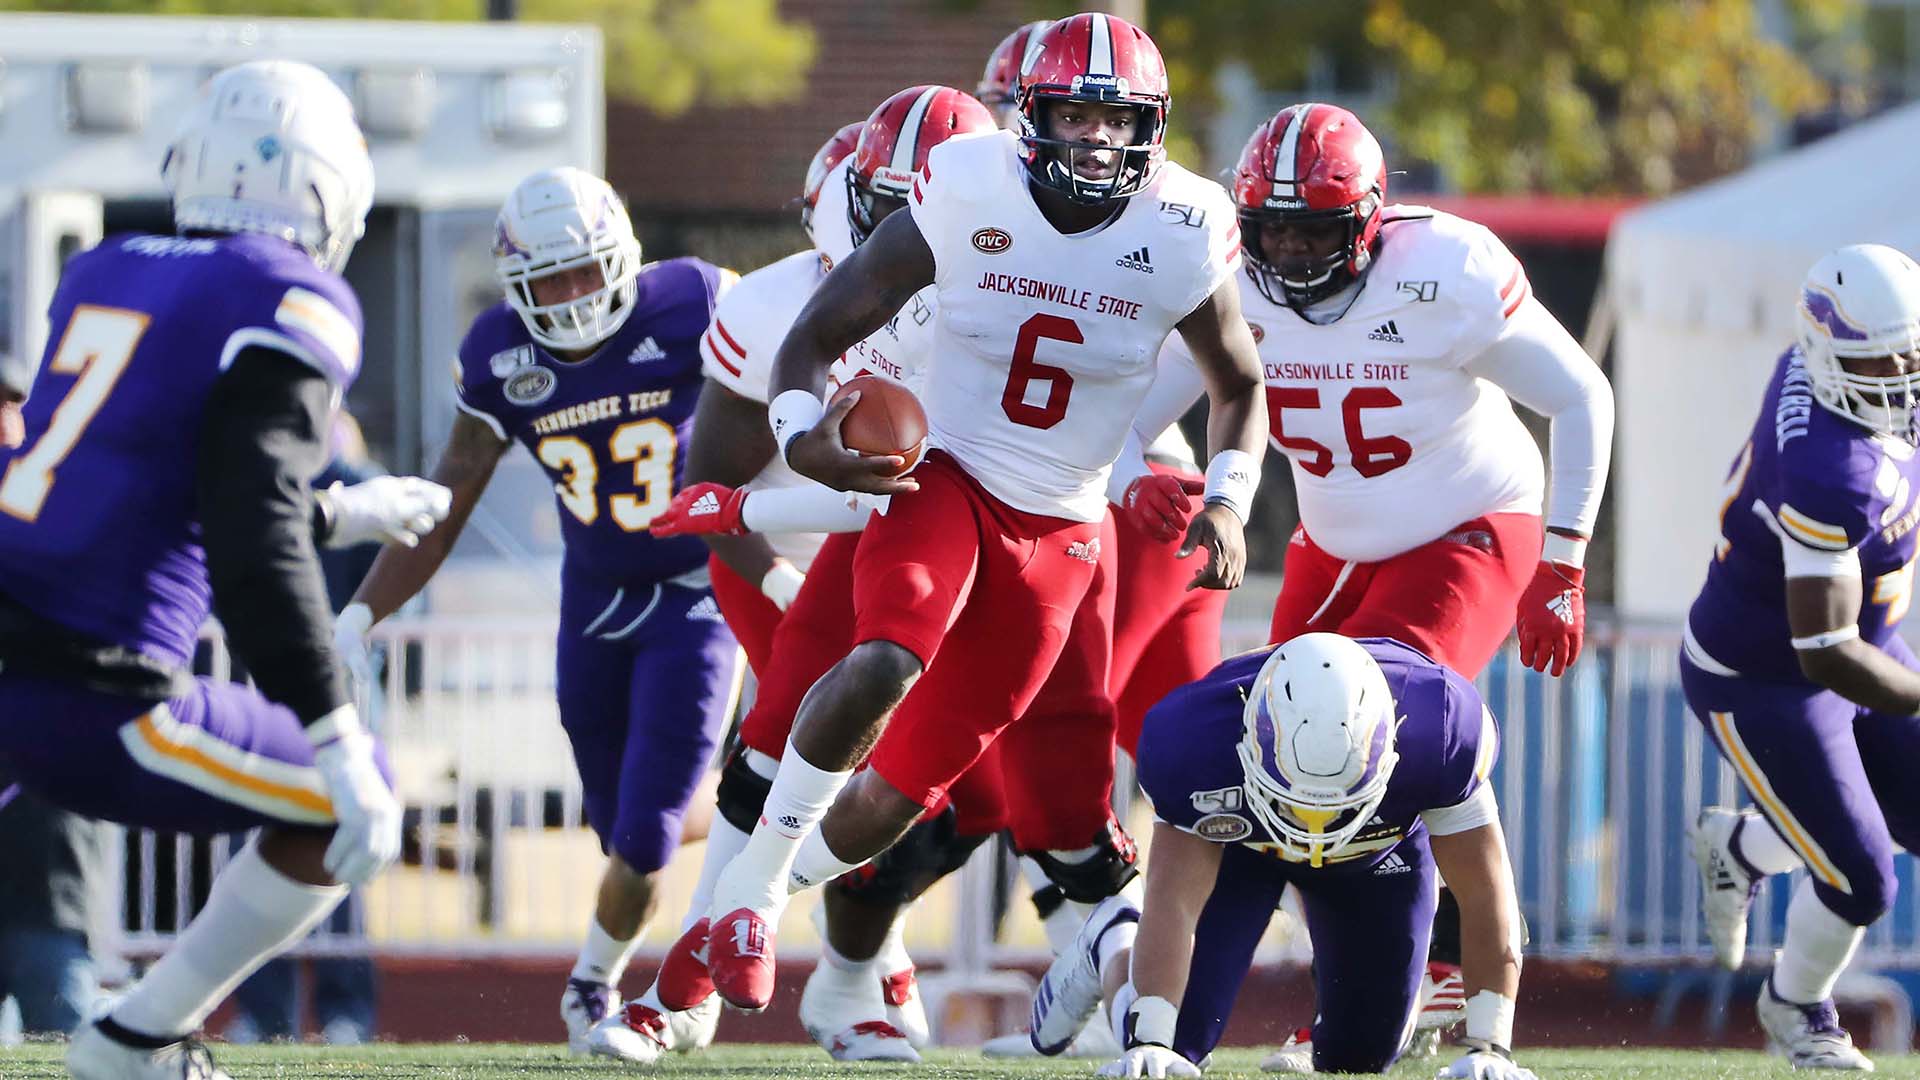 2021 FCS Season Preview: Jacksonville State